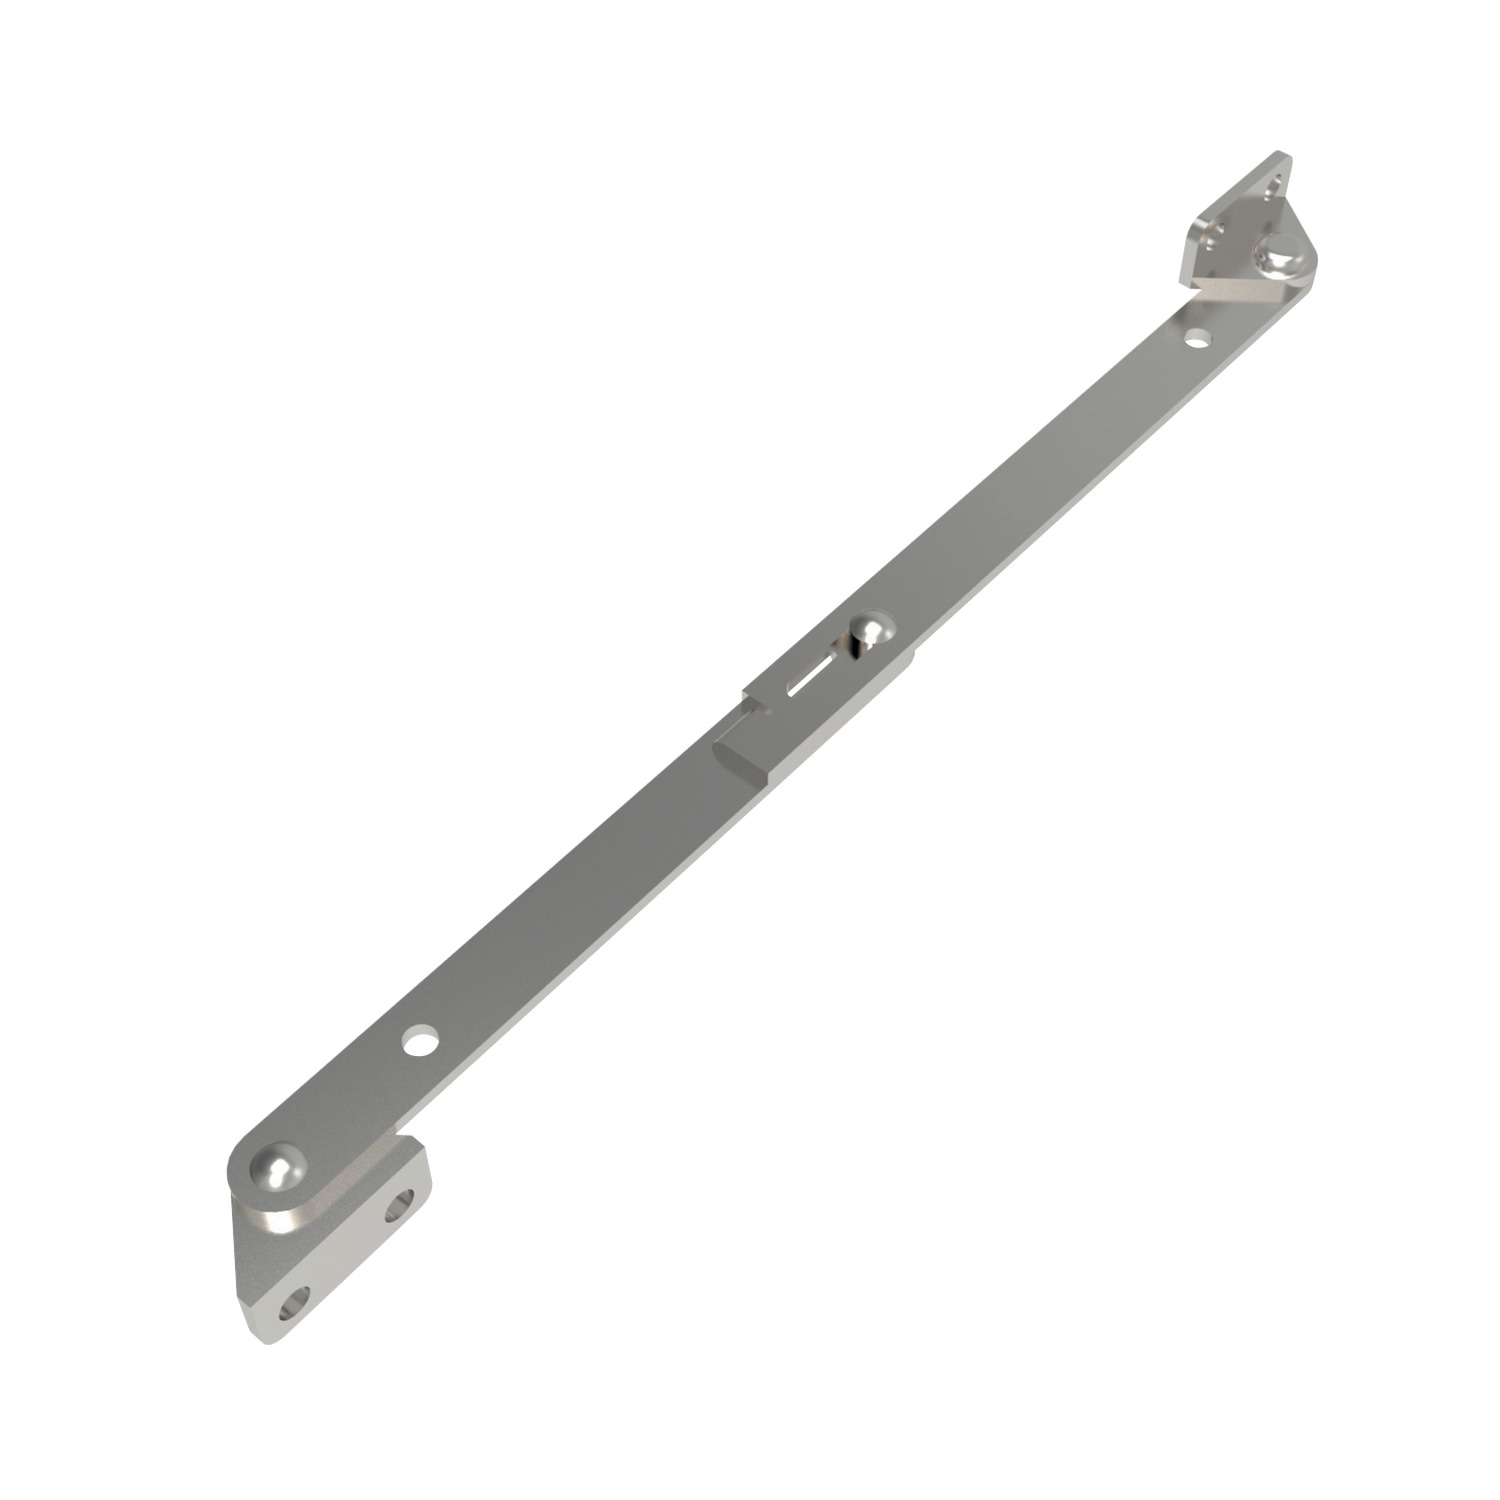 N0951.AW0020 Lid Stays stainless steel